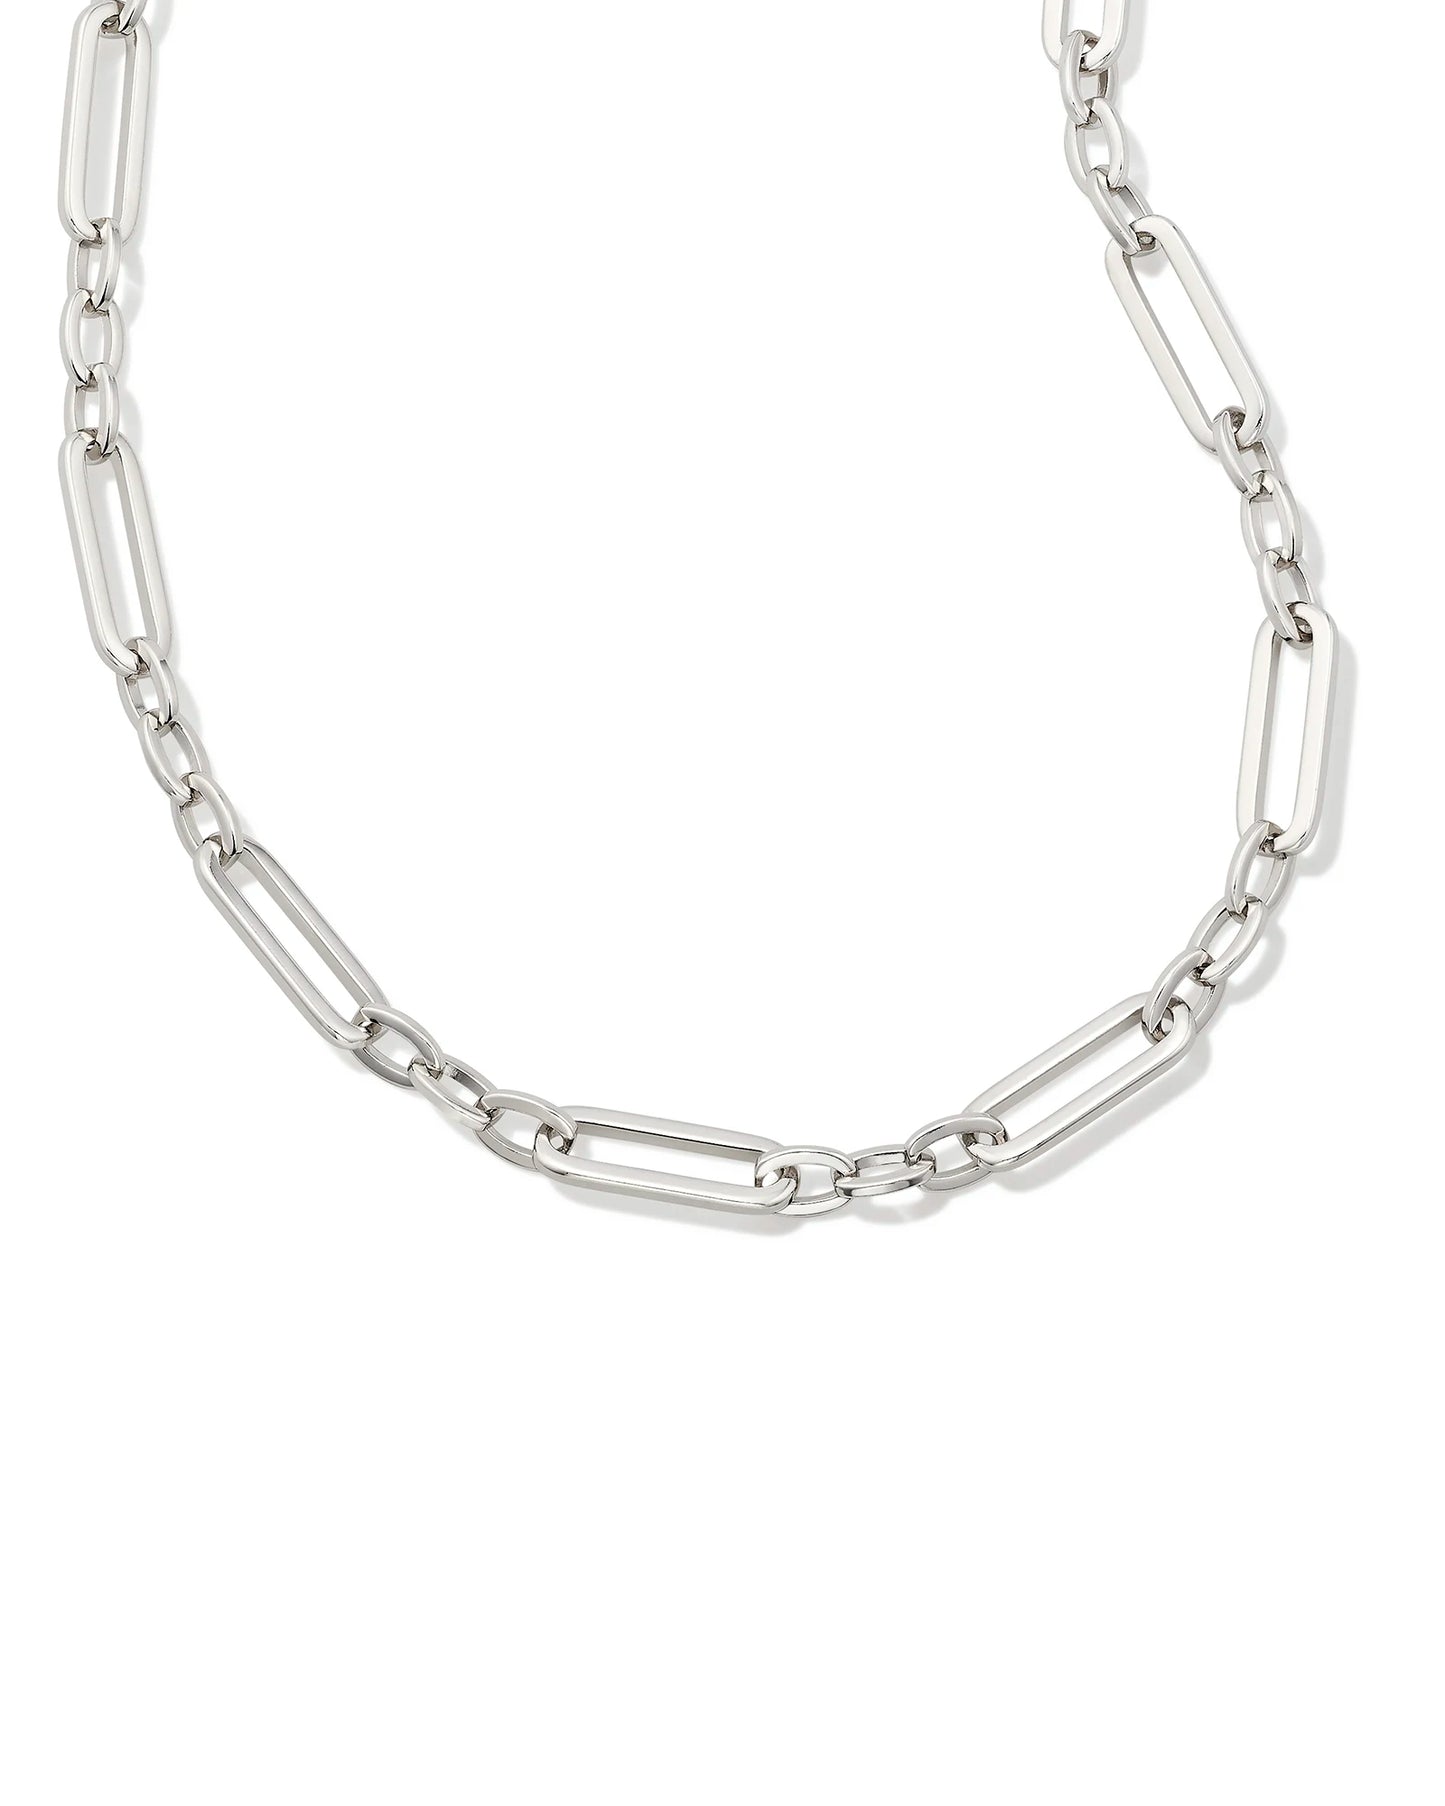 Kendra Scott Heather Link and Chain Necklace Silver-Necklaces-Kendra Scott-N00227RHD-The Twisted Chandelier